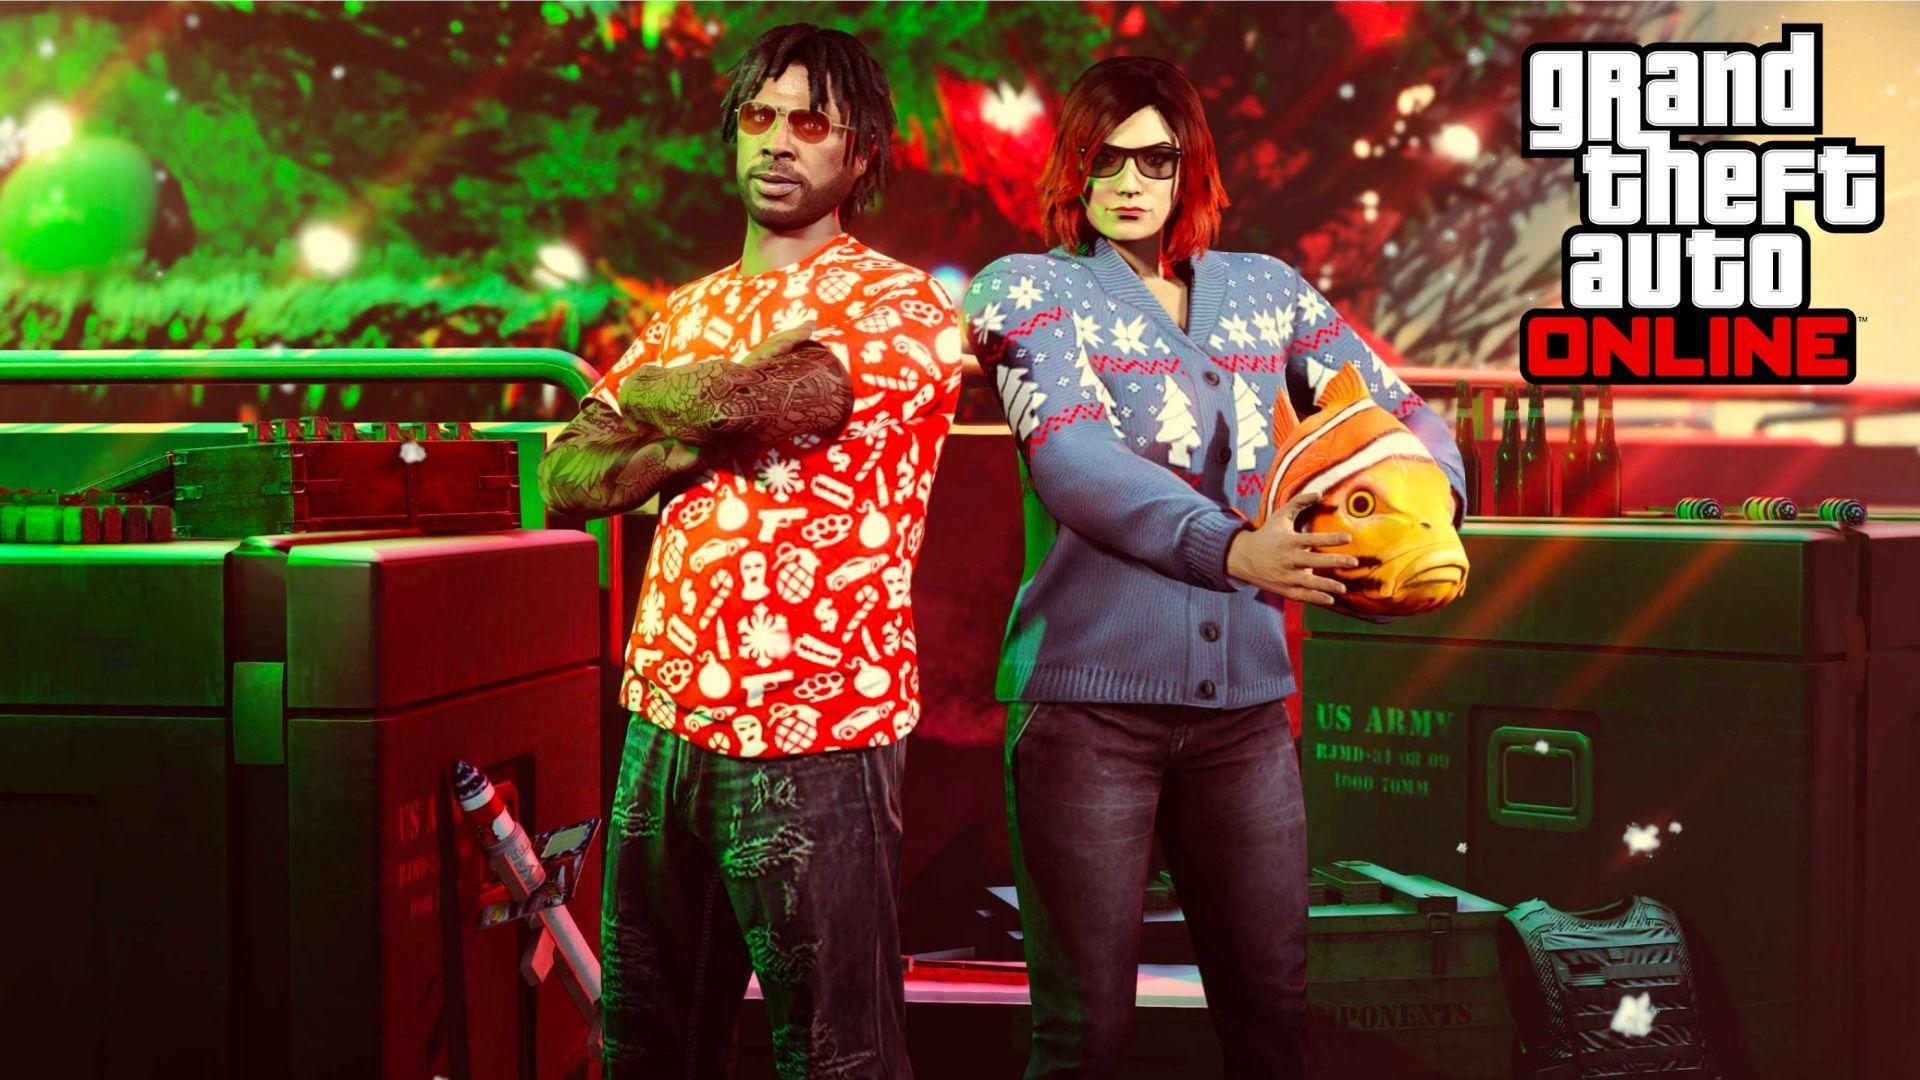 GTA online characters holding gifts and presents